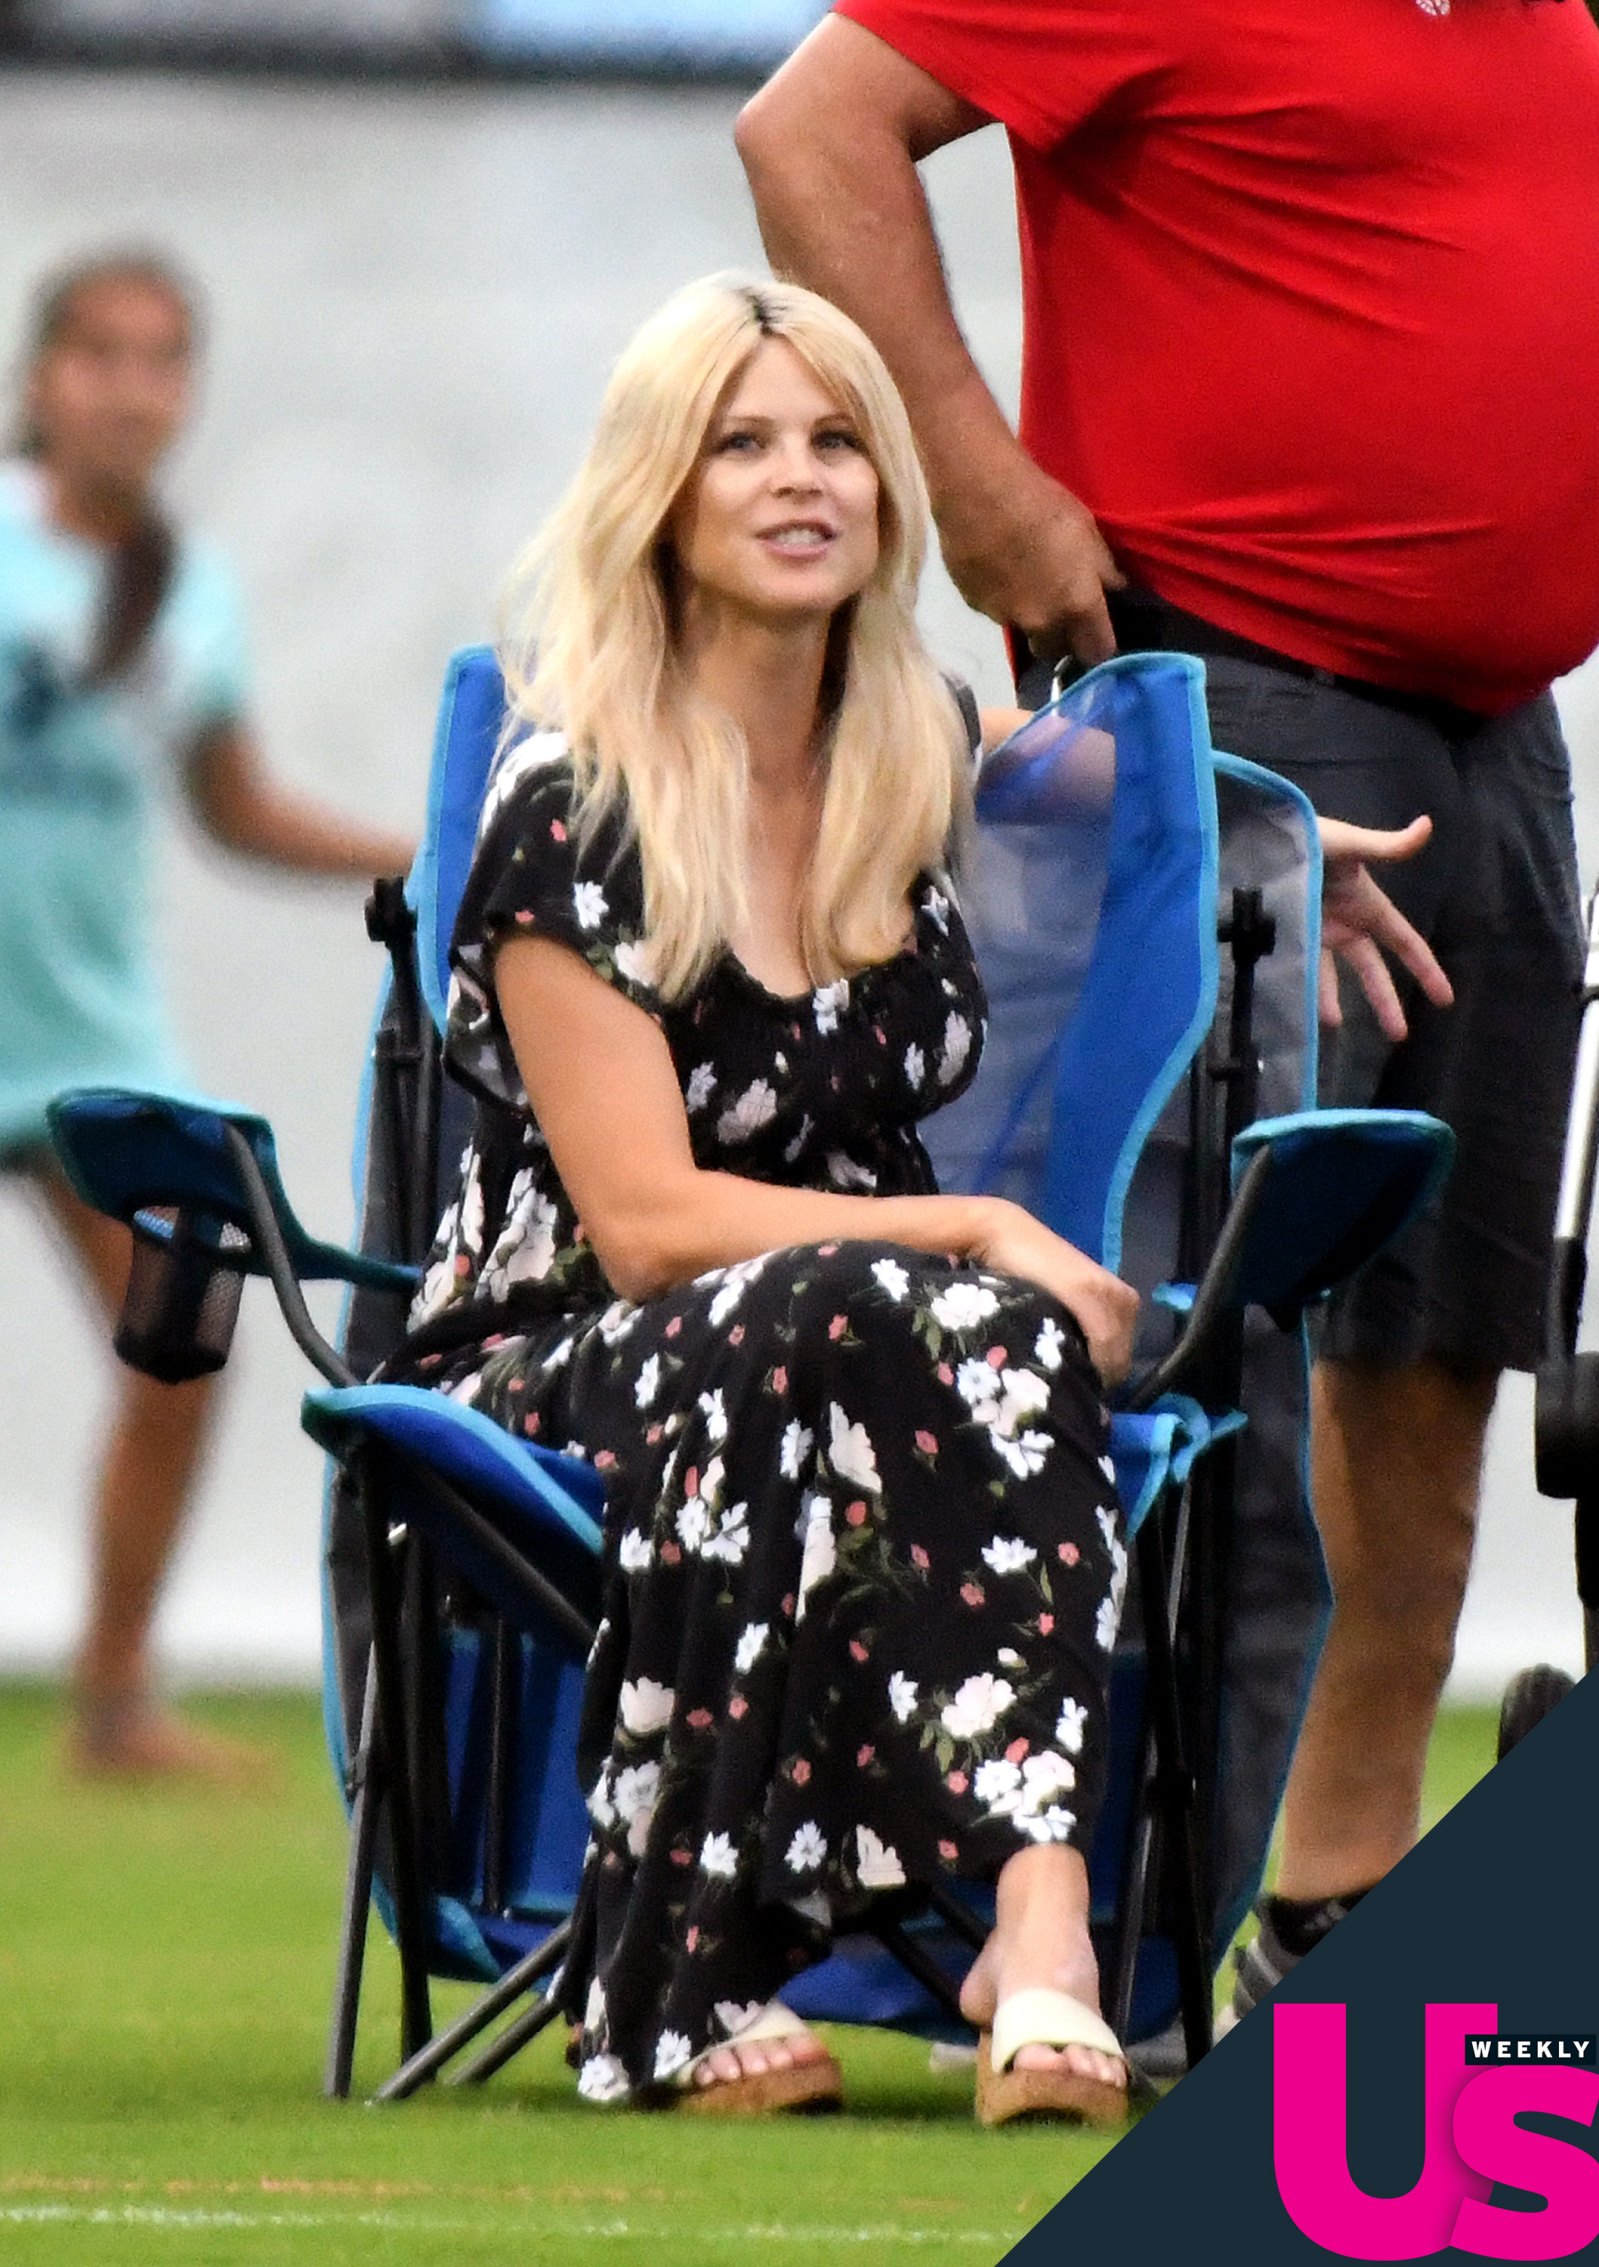 Elin Nordegren Steps Out With Jordan Cameron After Giving Birth to Baby No. 3